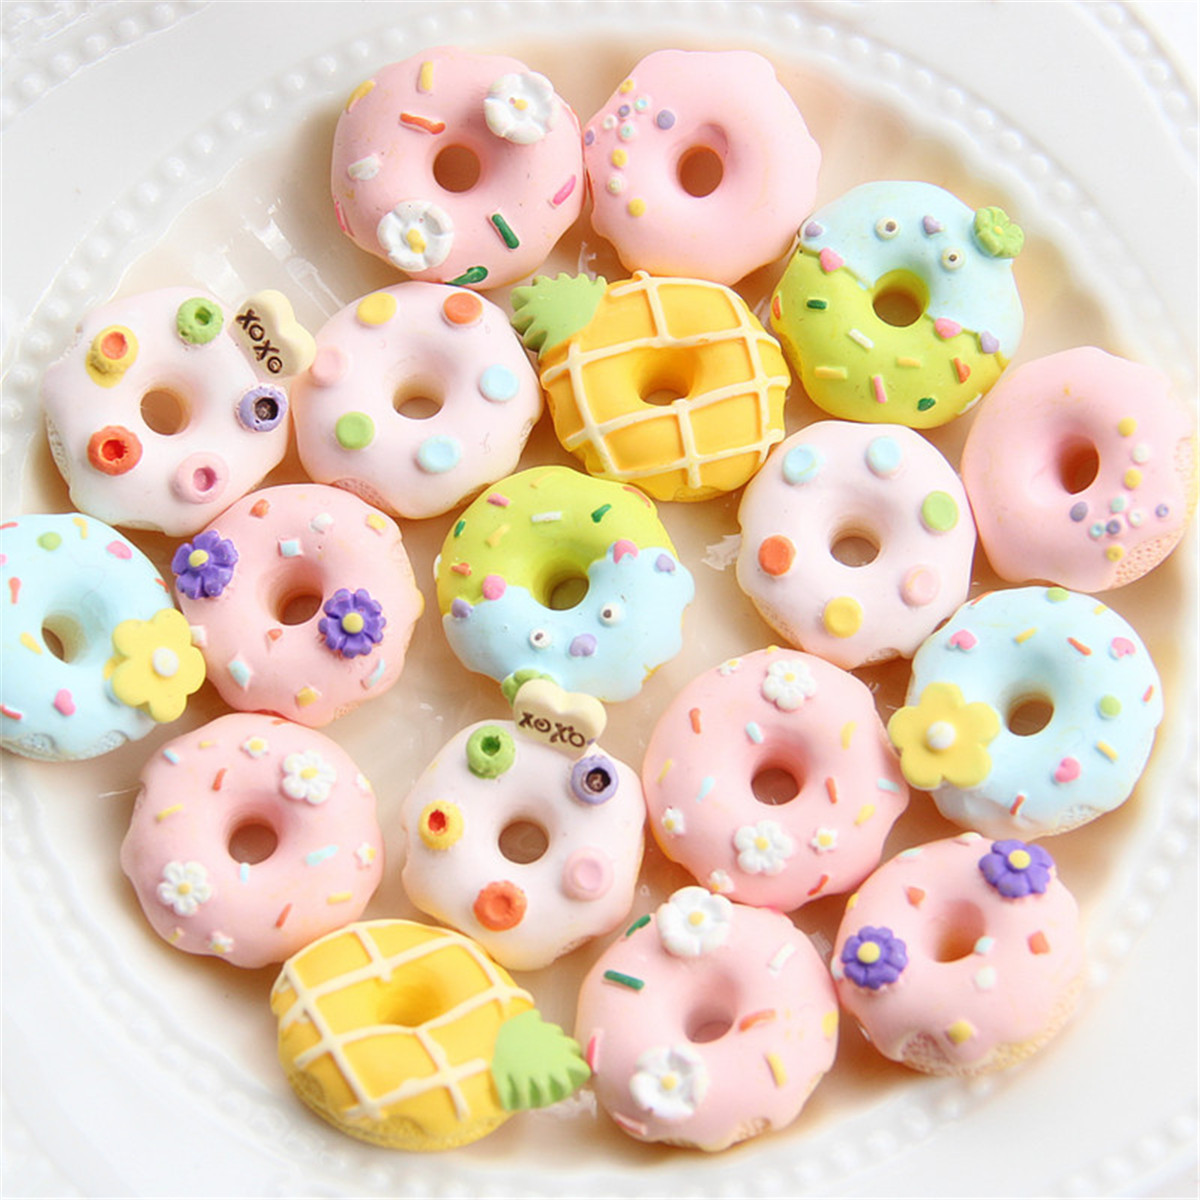 New Mini Donut Beads For Jewelry Making Bulk Beads To Make Bracelets DIY Pacifier Chain Jewelry Accessories